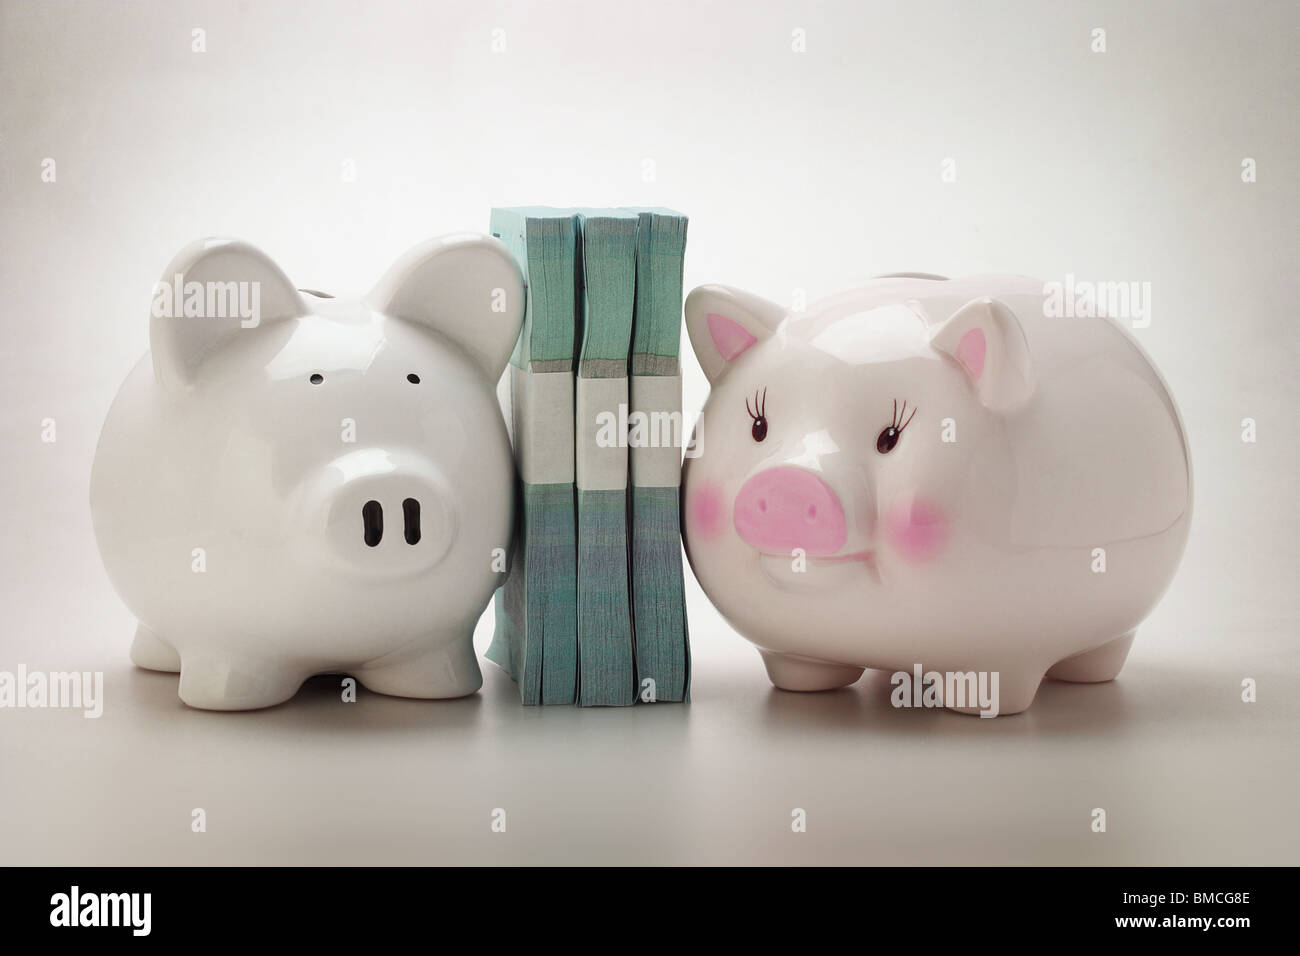 Two Piggy banks and stacks of paper money Stock Photo